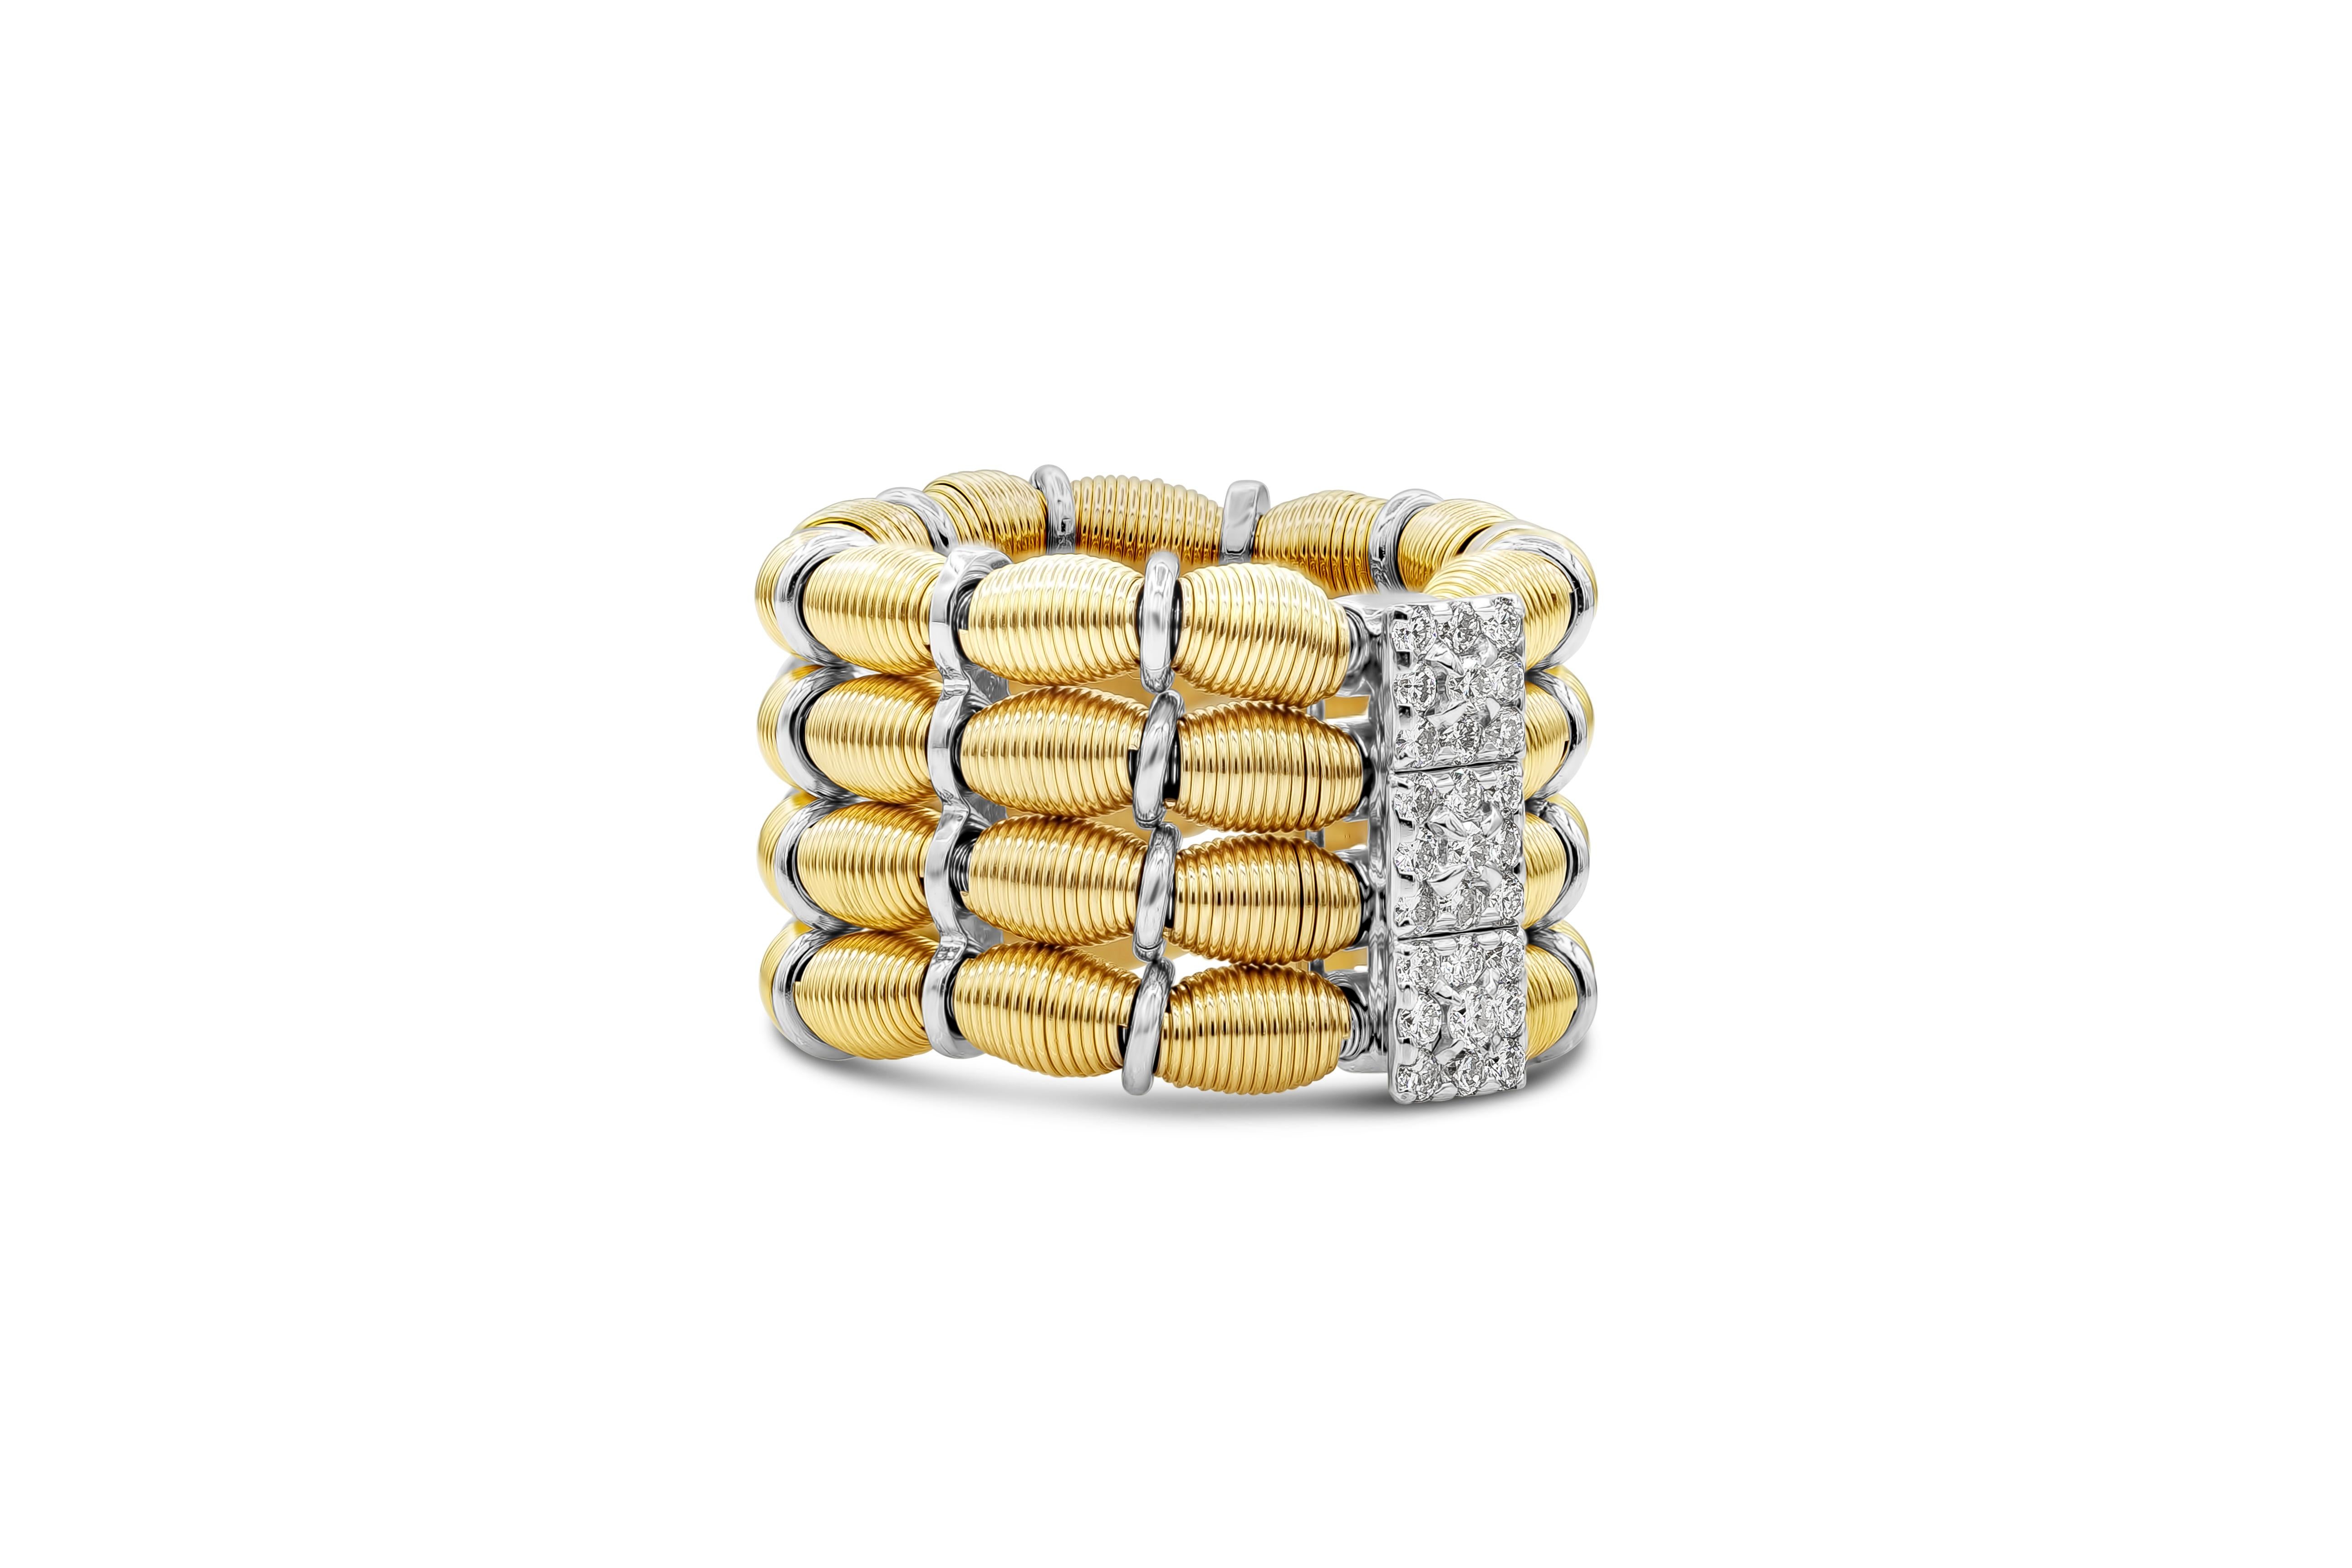 A unique and fashionable ring showcasing four rows of ribbed beads connected by an 18k white gold plate set with round diamonds. Diamonds weigh 0.22 carats total and are approximately F color, VS clarity. Flexible and expandable design. Size 6 US.